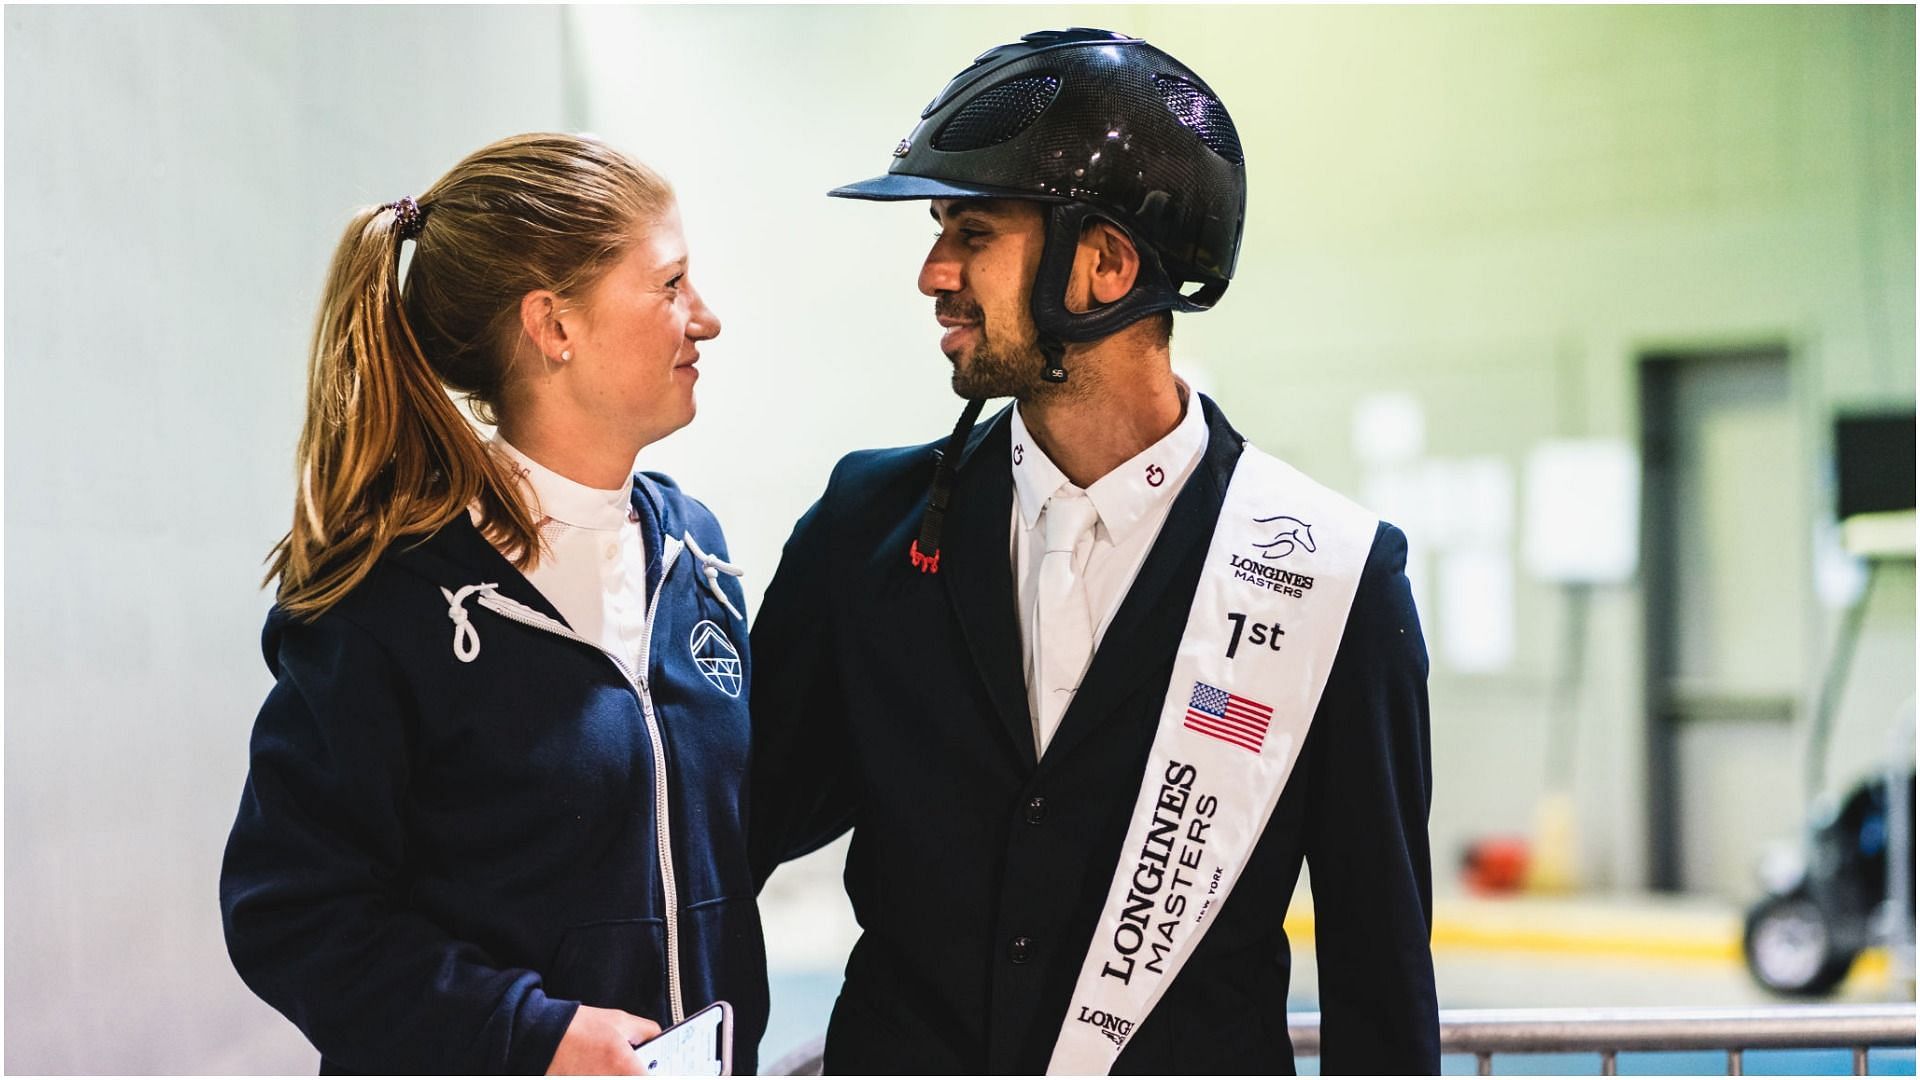 Nayel Nassar and Jennifer Gates after the Longines Grand Prix de New York, at the Longines Masters New York 2019 (Image via Getty Images)